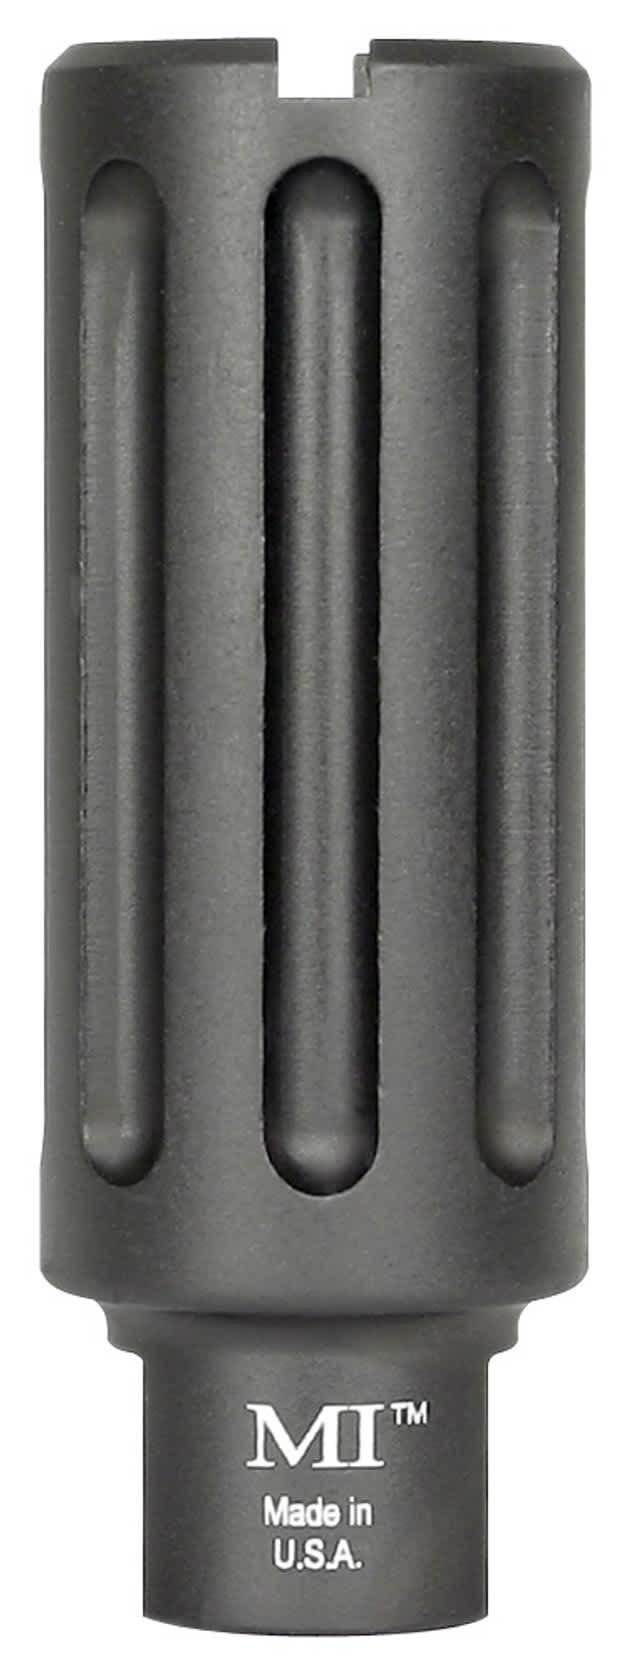 You vs the guy she told you not worry about (MDT Elite muzzle brake) :  r/canadaguns